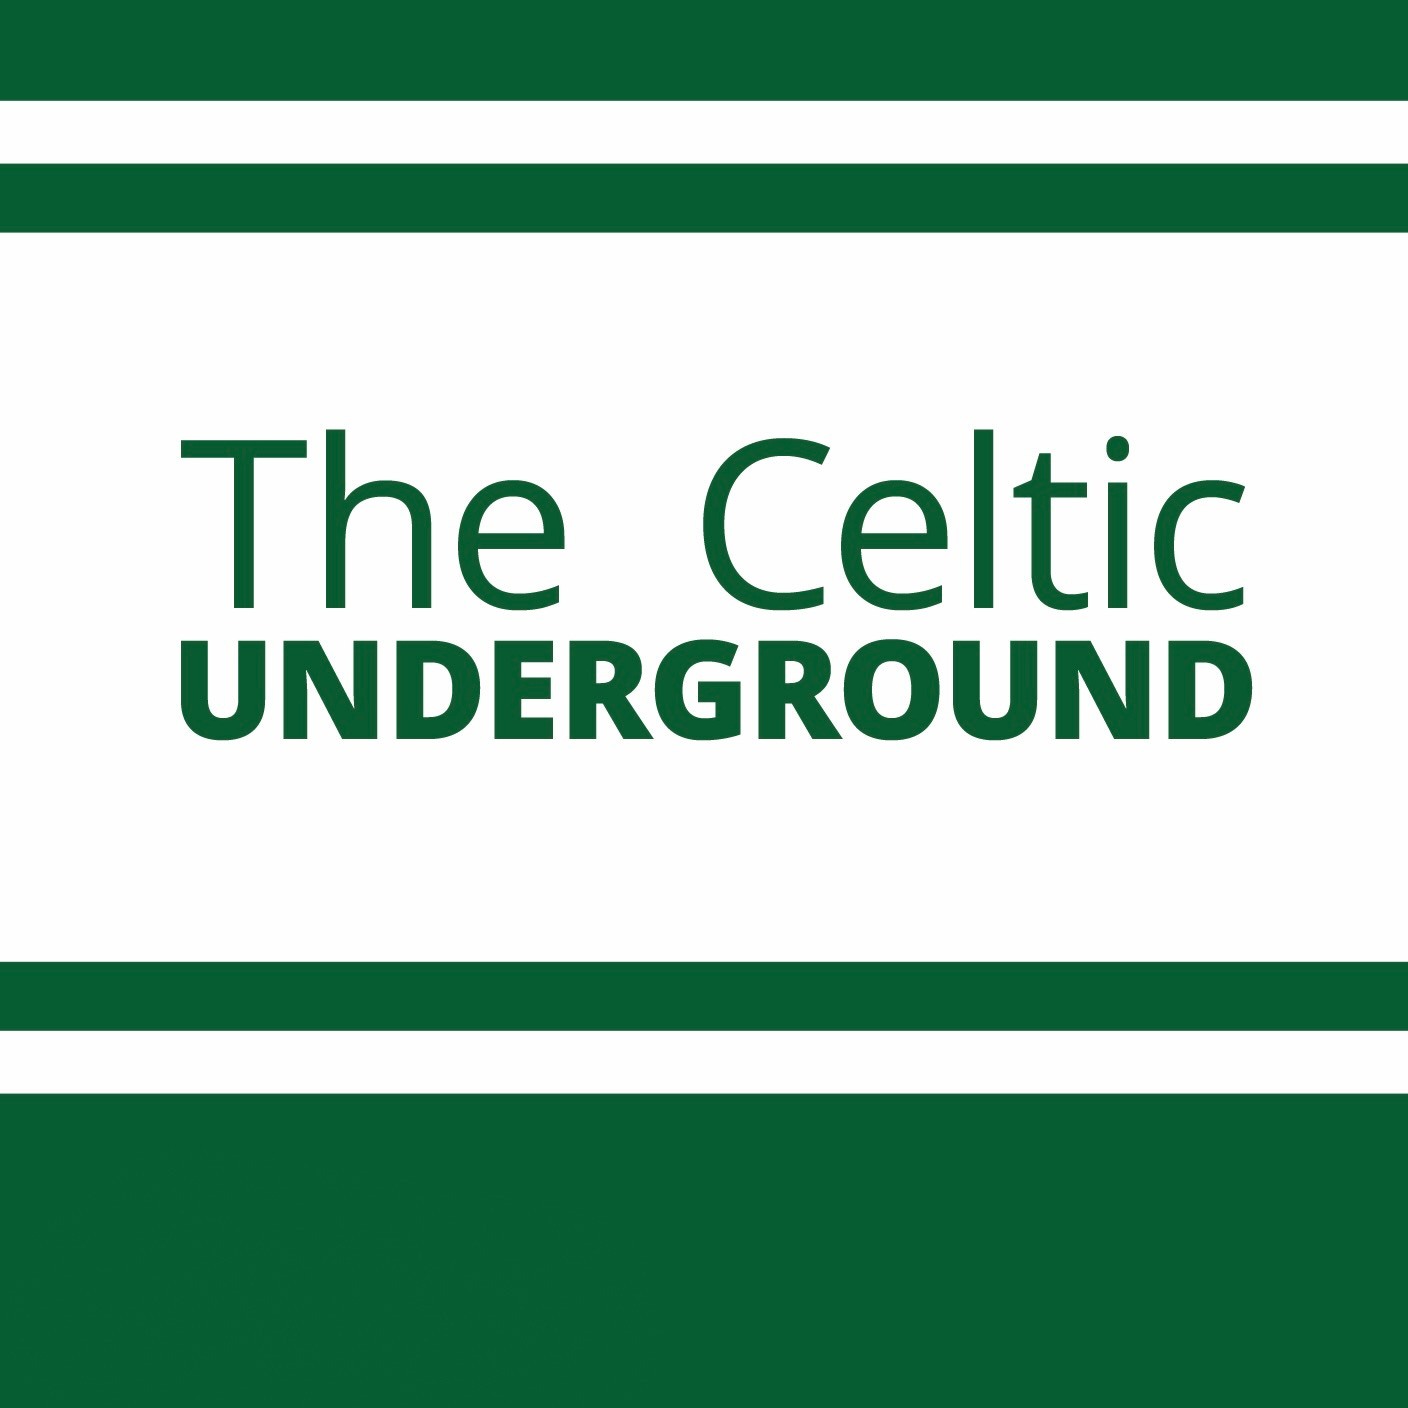 The Celtic Underground - A Full Thorough Res 12 Update